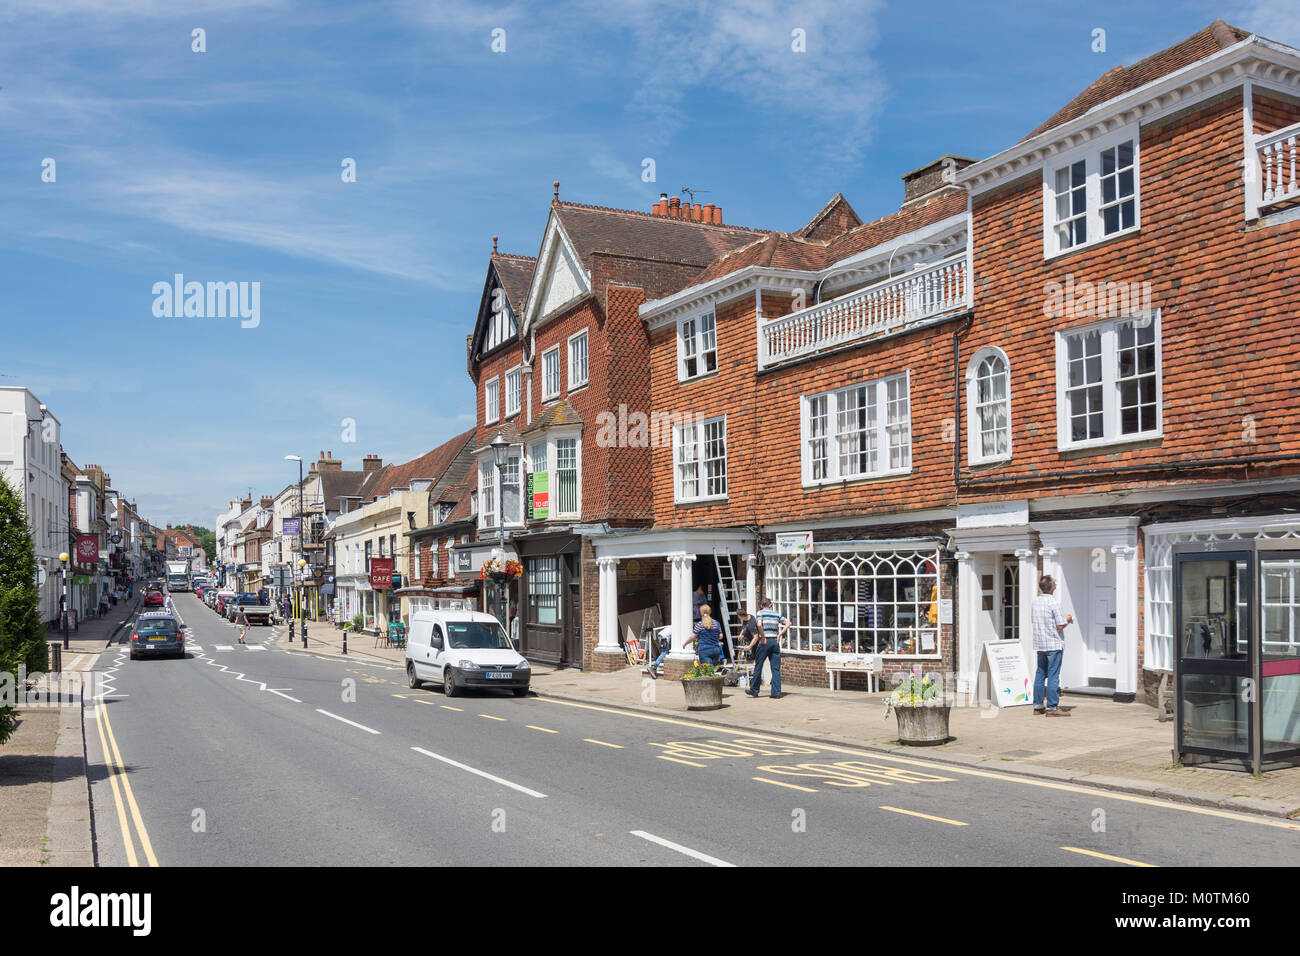 High Street, Battle, East Sussex, England, Regno Unito Foto Stock